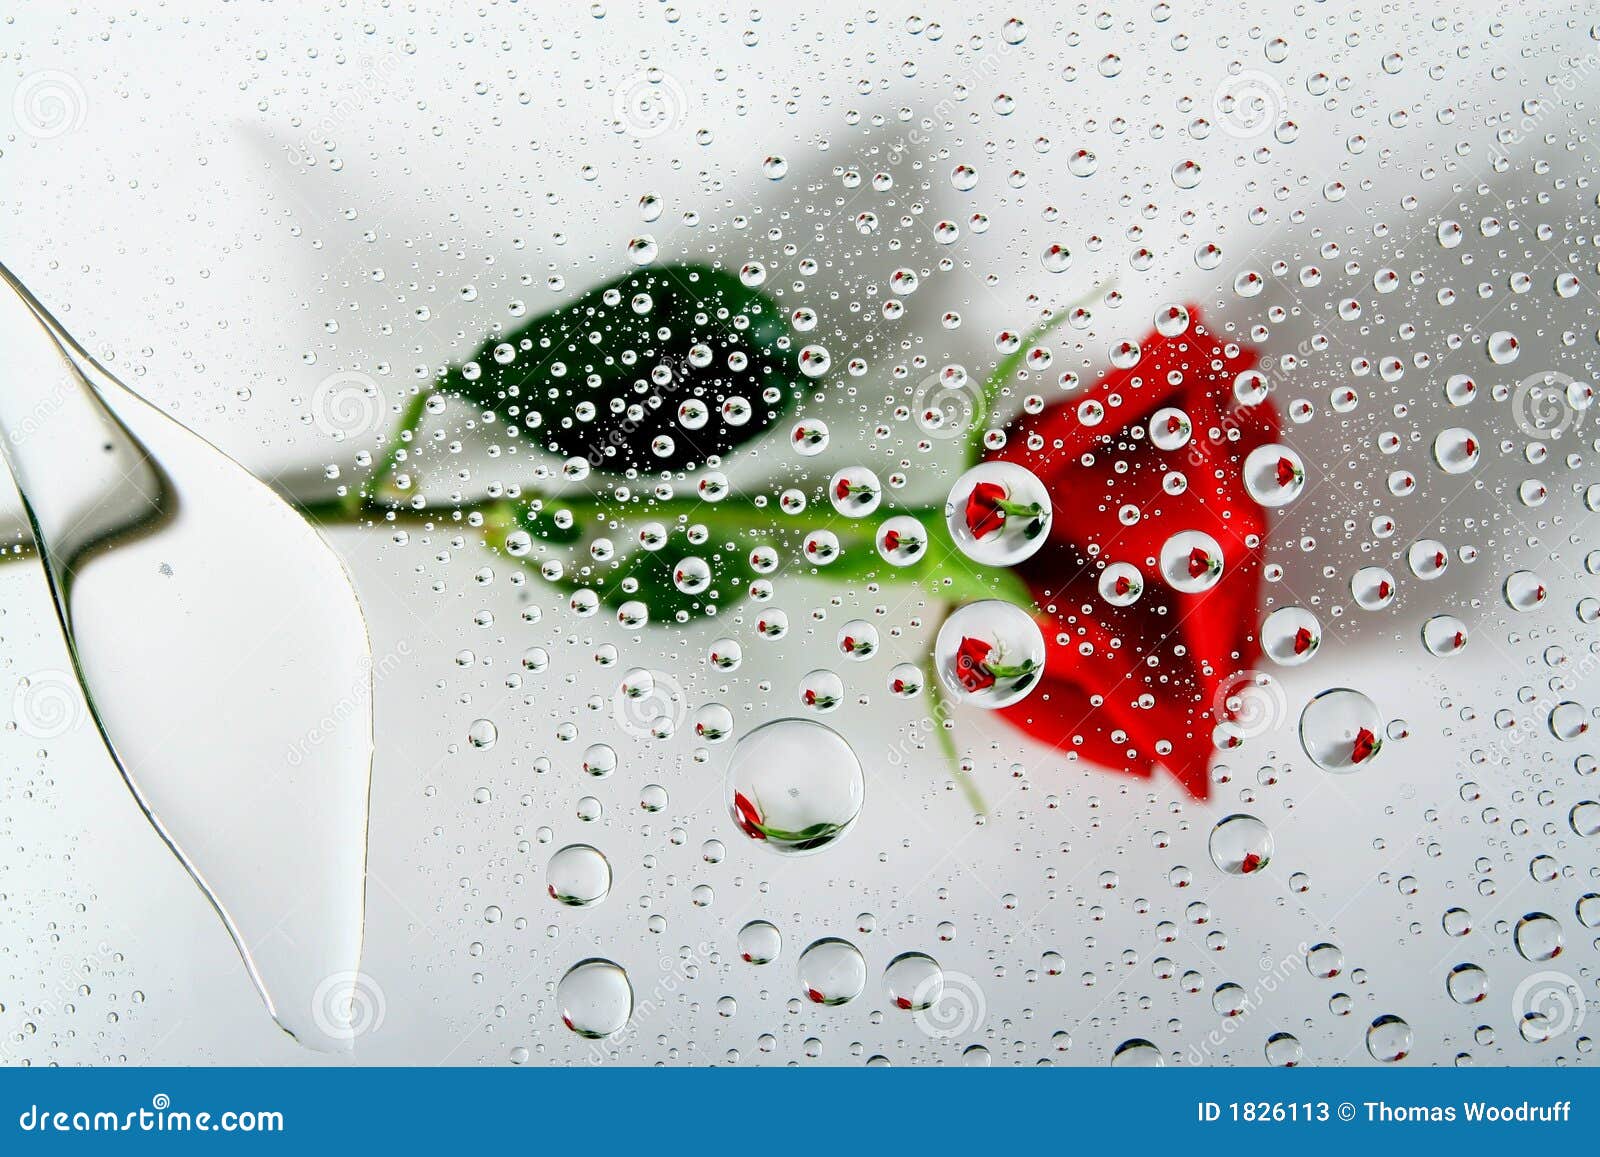 Red Rose In Water Drops 1 Stock Photos - Image: 1826113